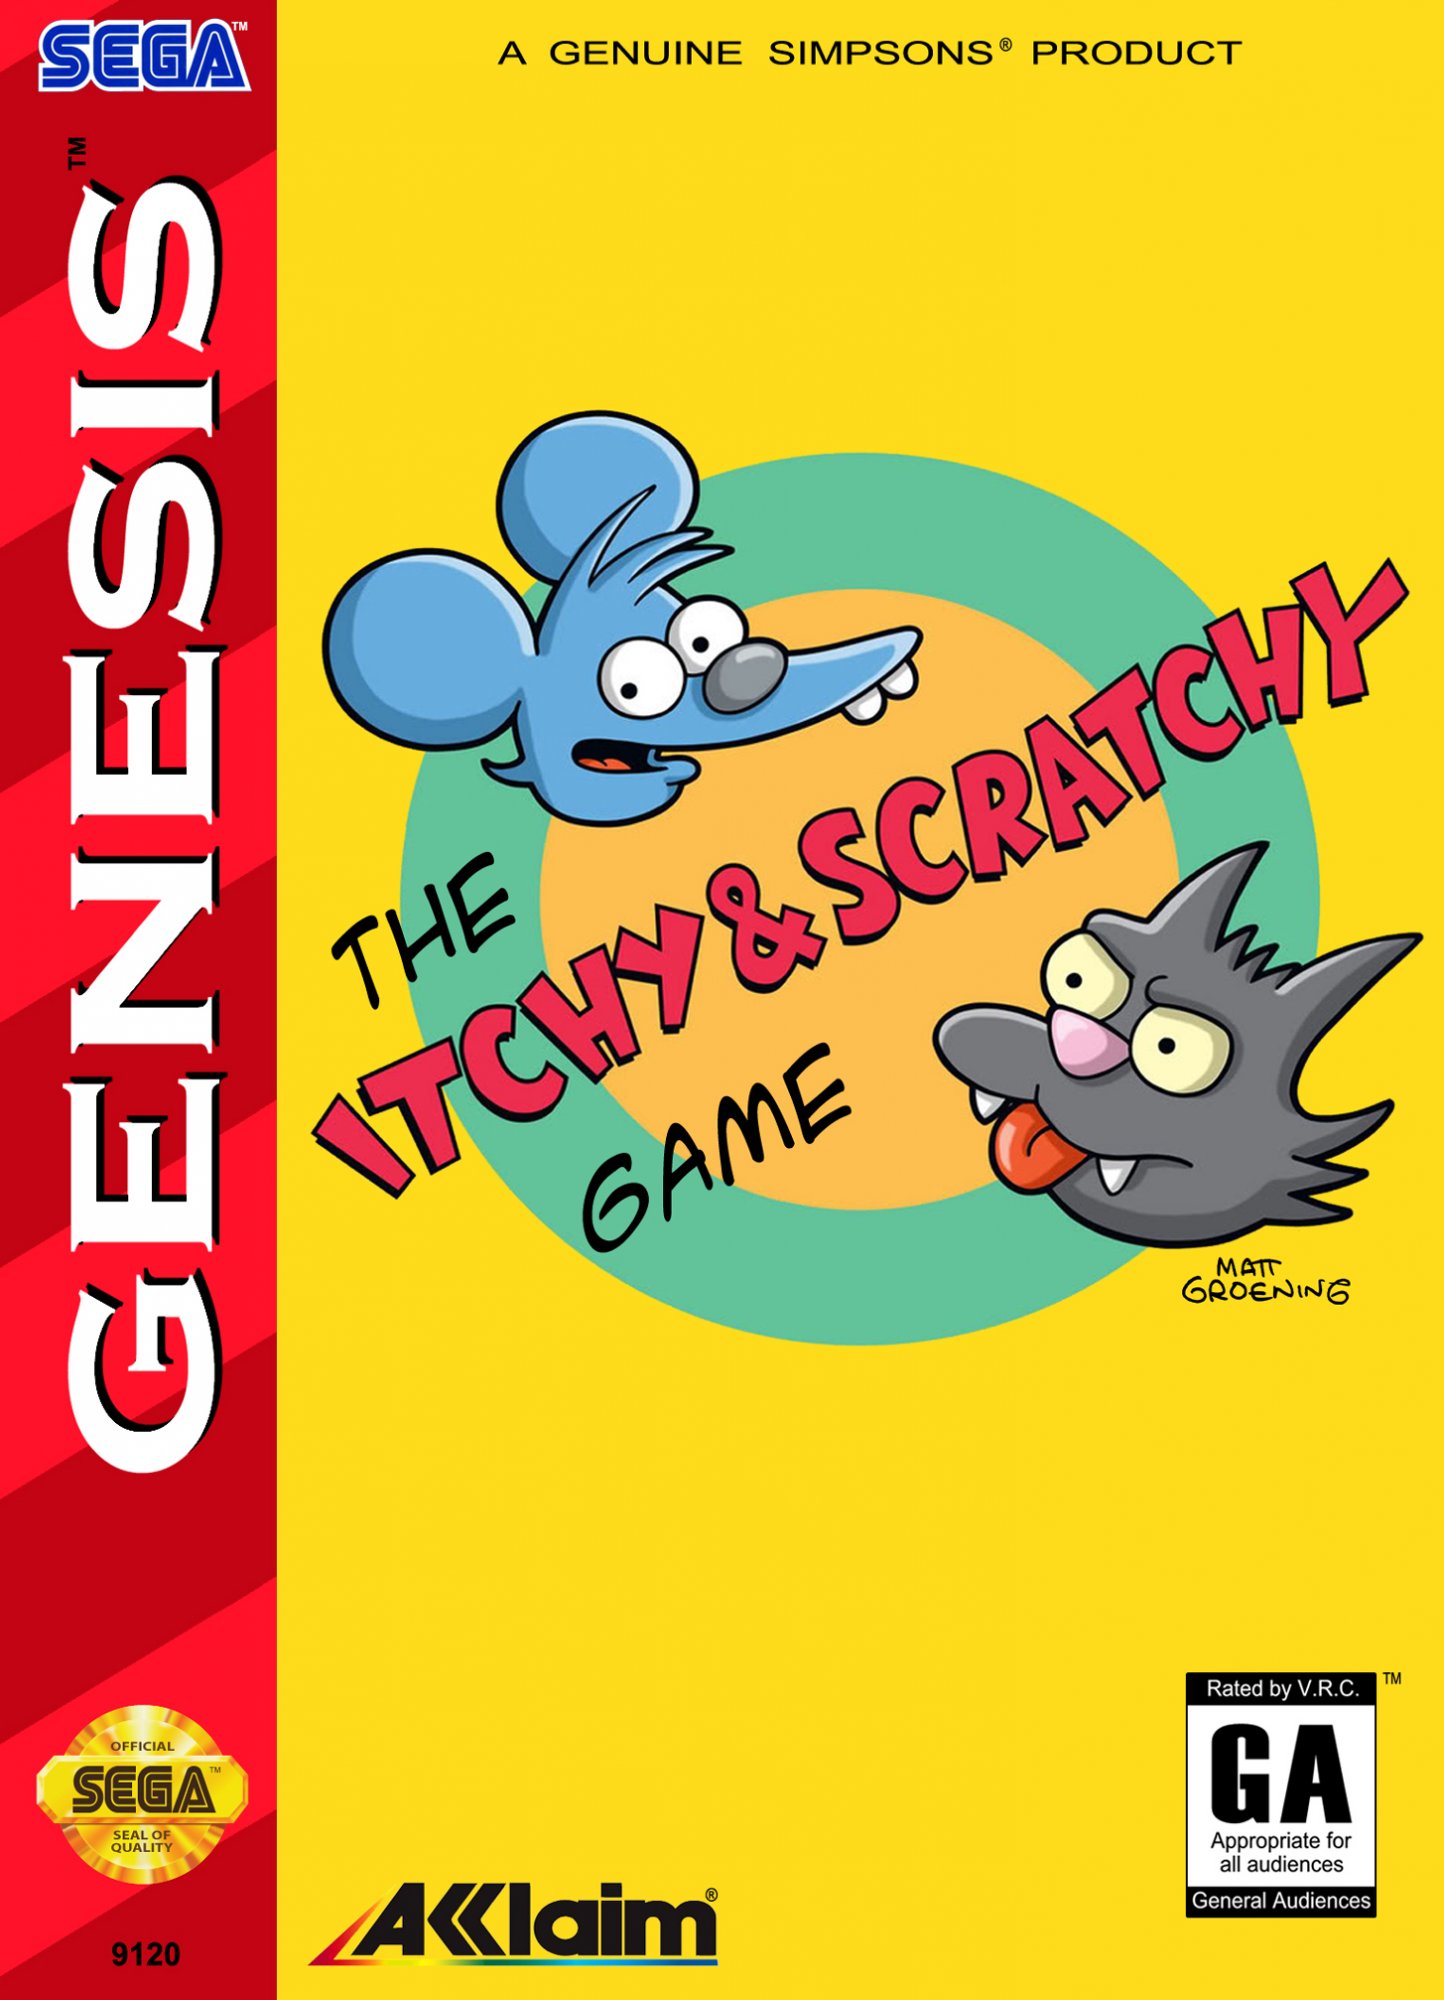 The Itchy & Scratchy Game (Prototype)